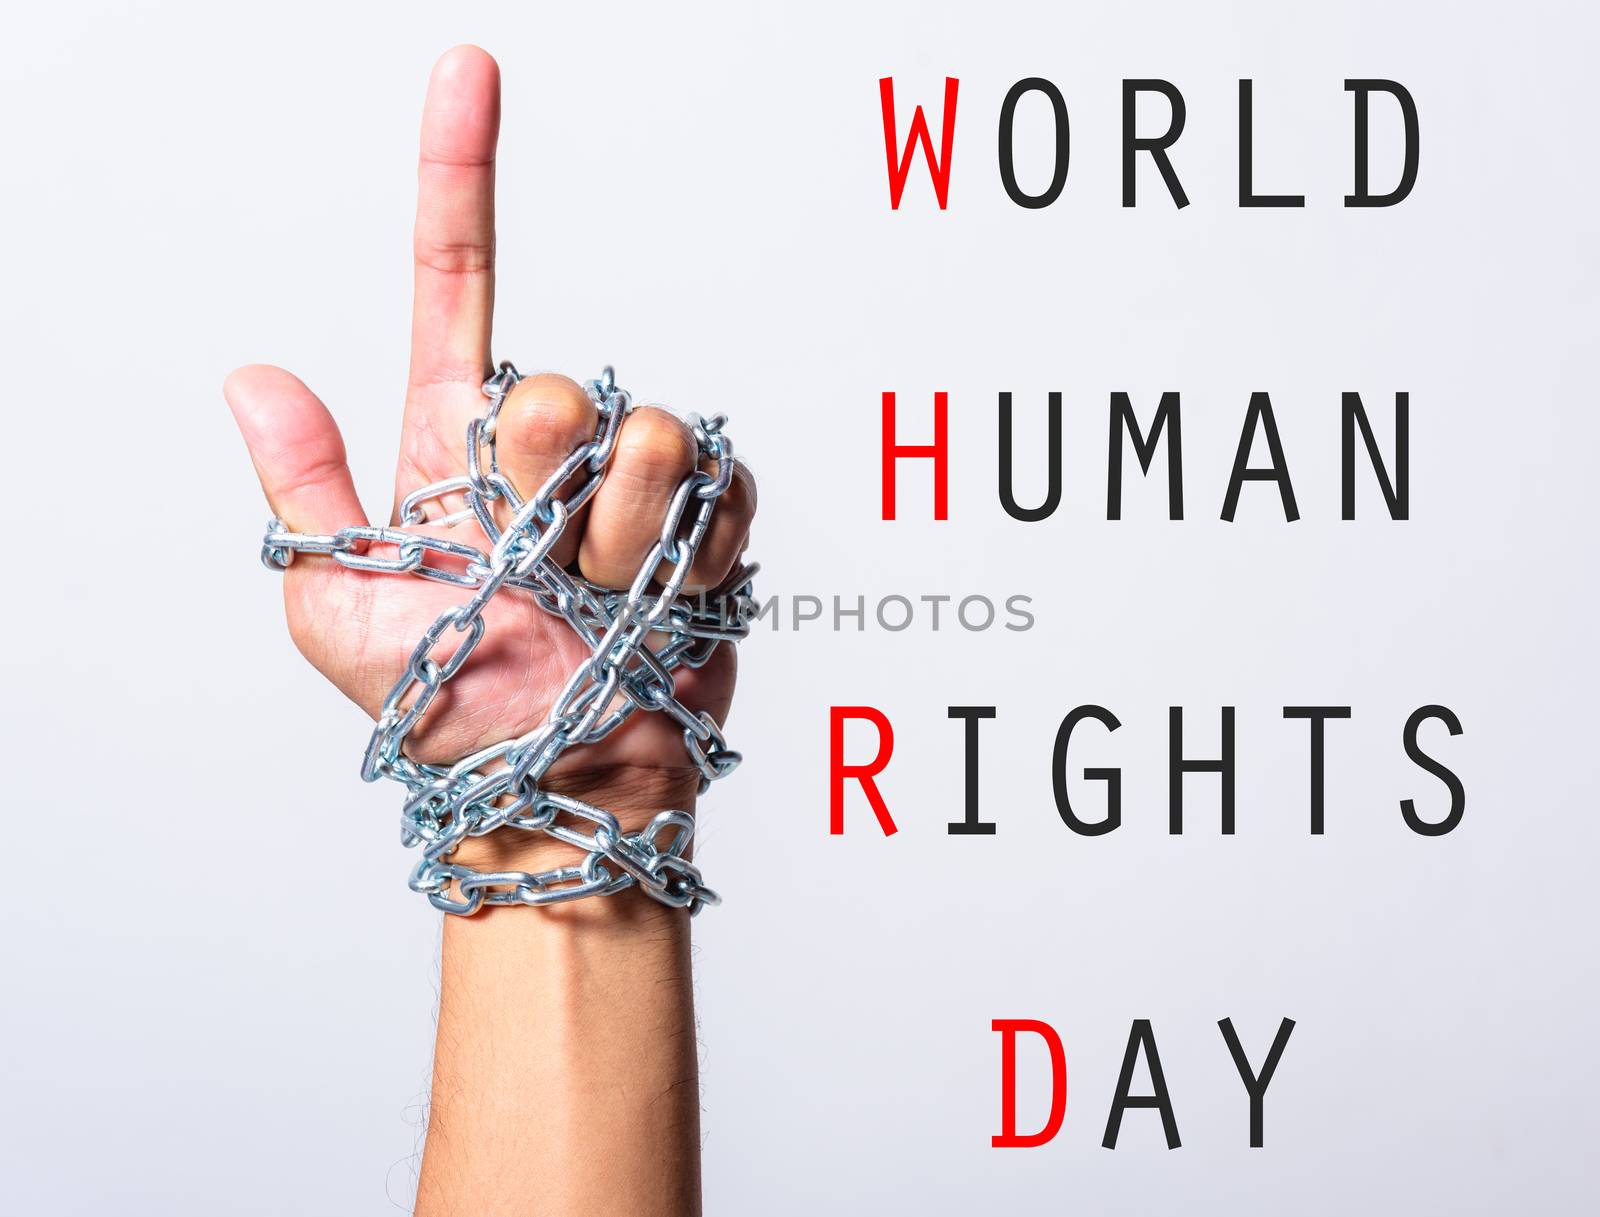 Chained fist hand point finger with WORLD HUMAN RIGHTS DAY text by Sorapop